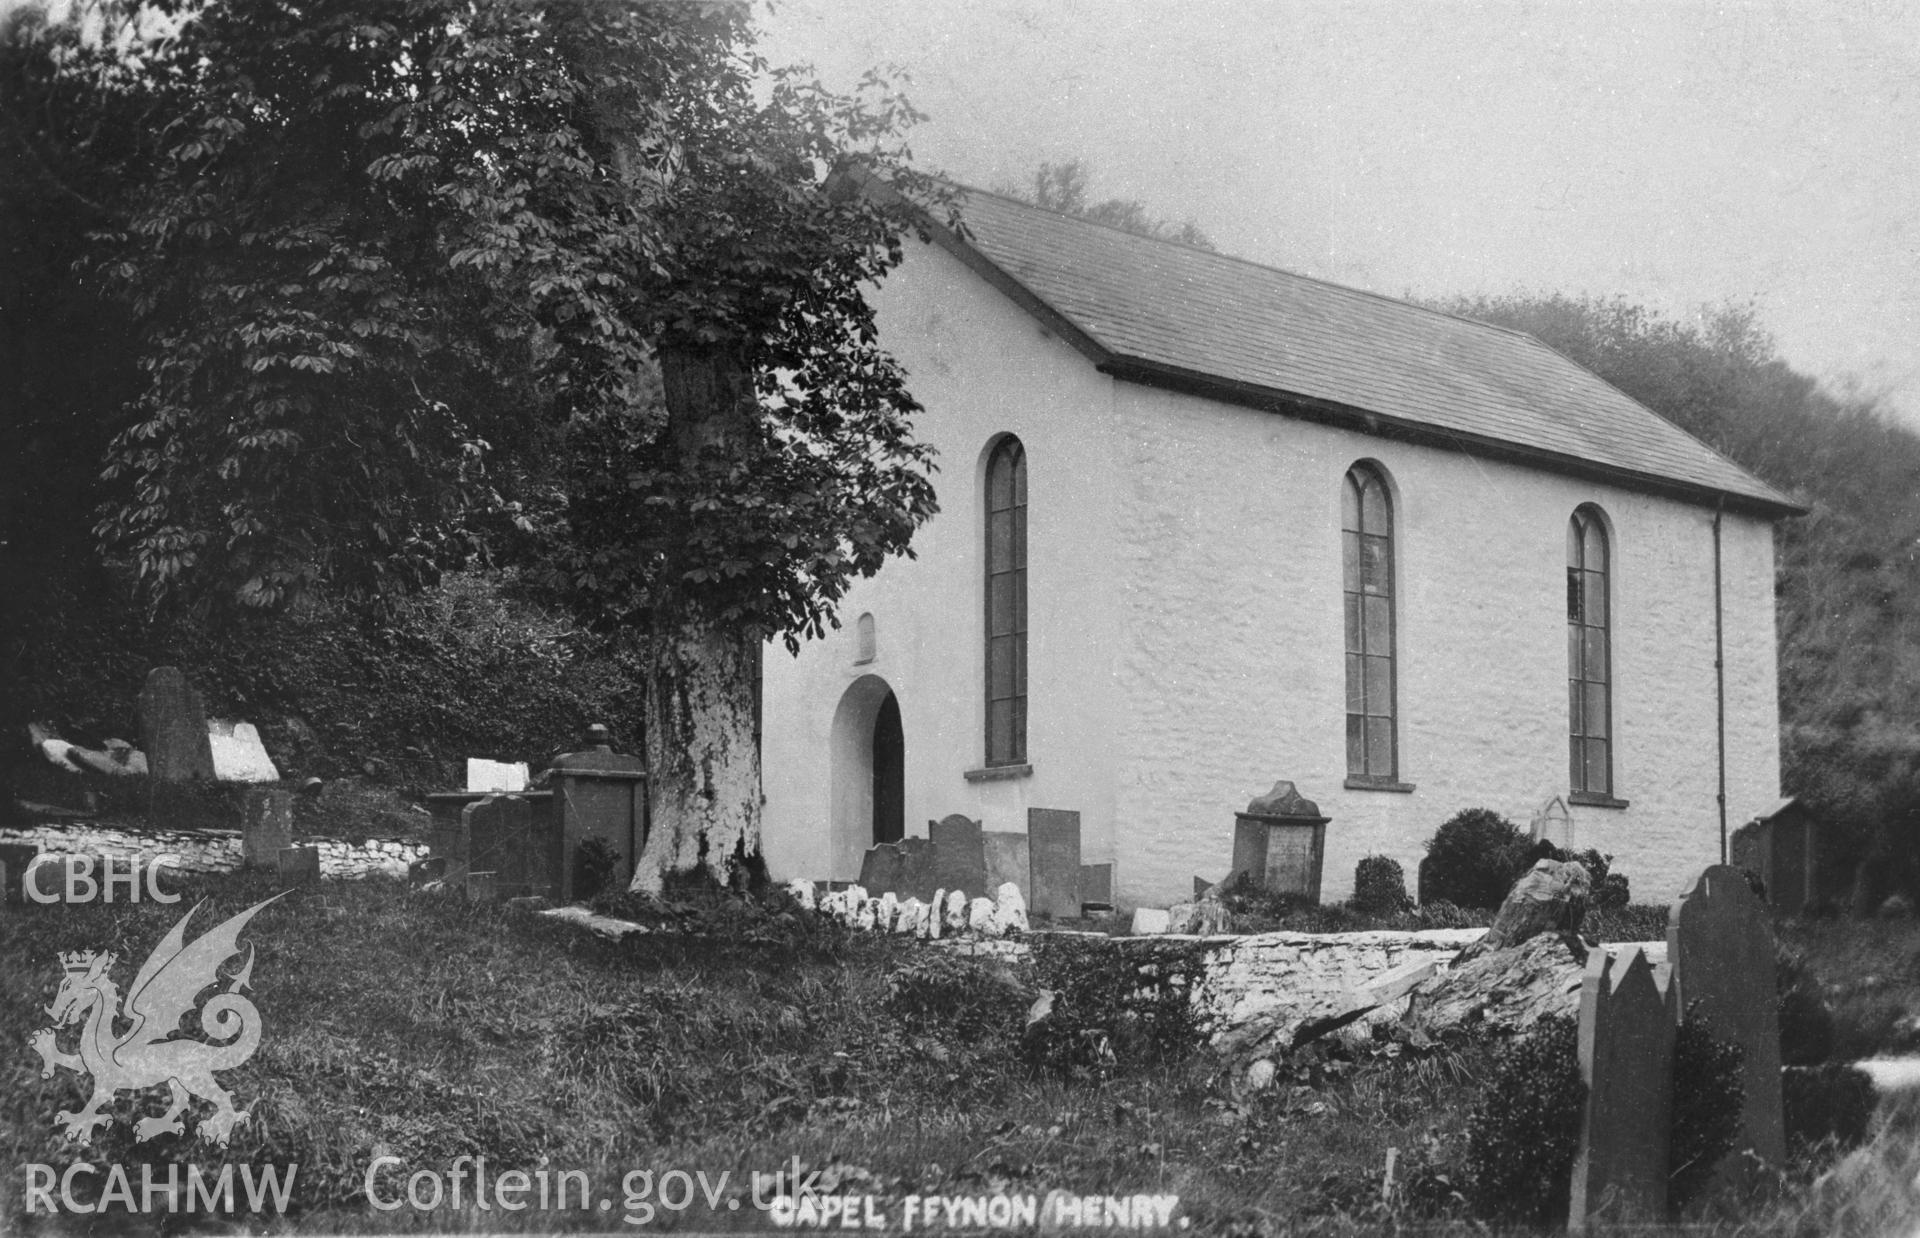 Capel Ffynnon Henry, Cynwyl Elfed;  photo copied from a postcard loaned by Thomas Lloyd, dated 1906. Copy negative held.